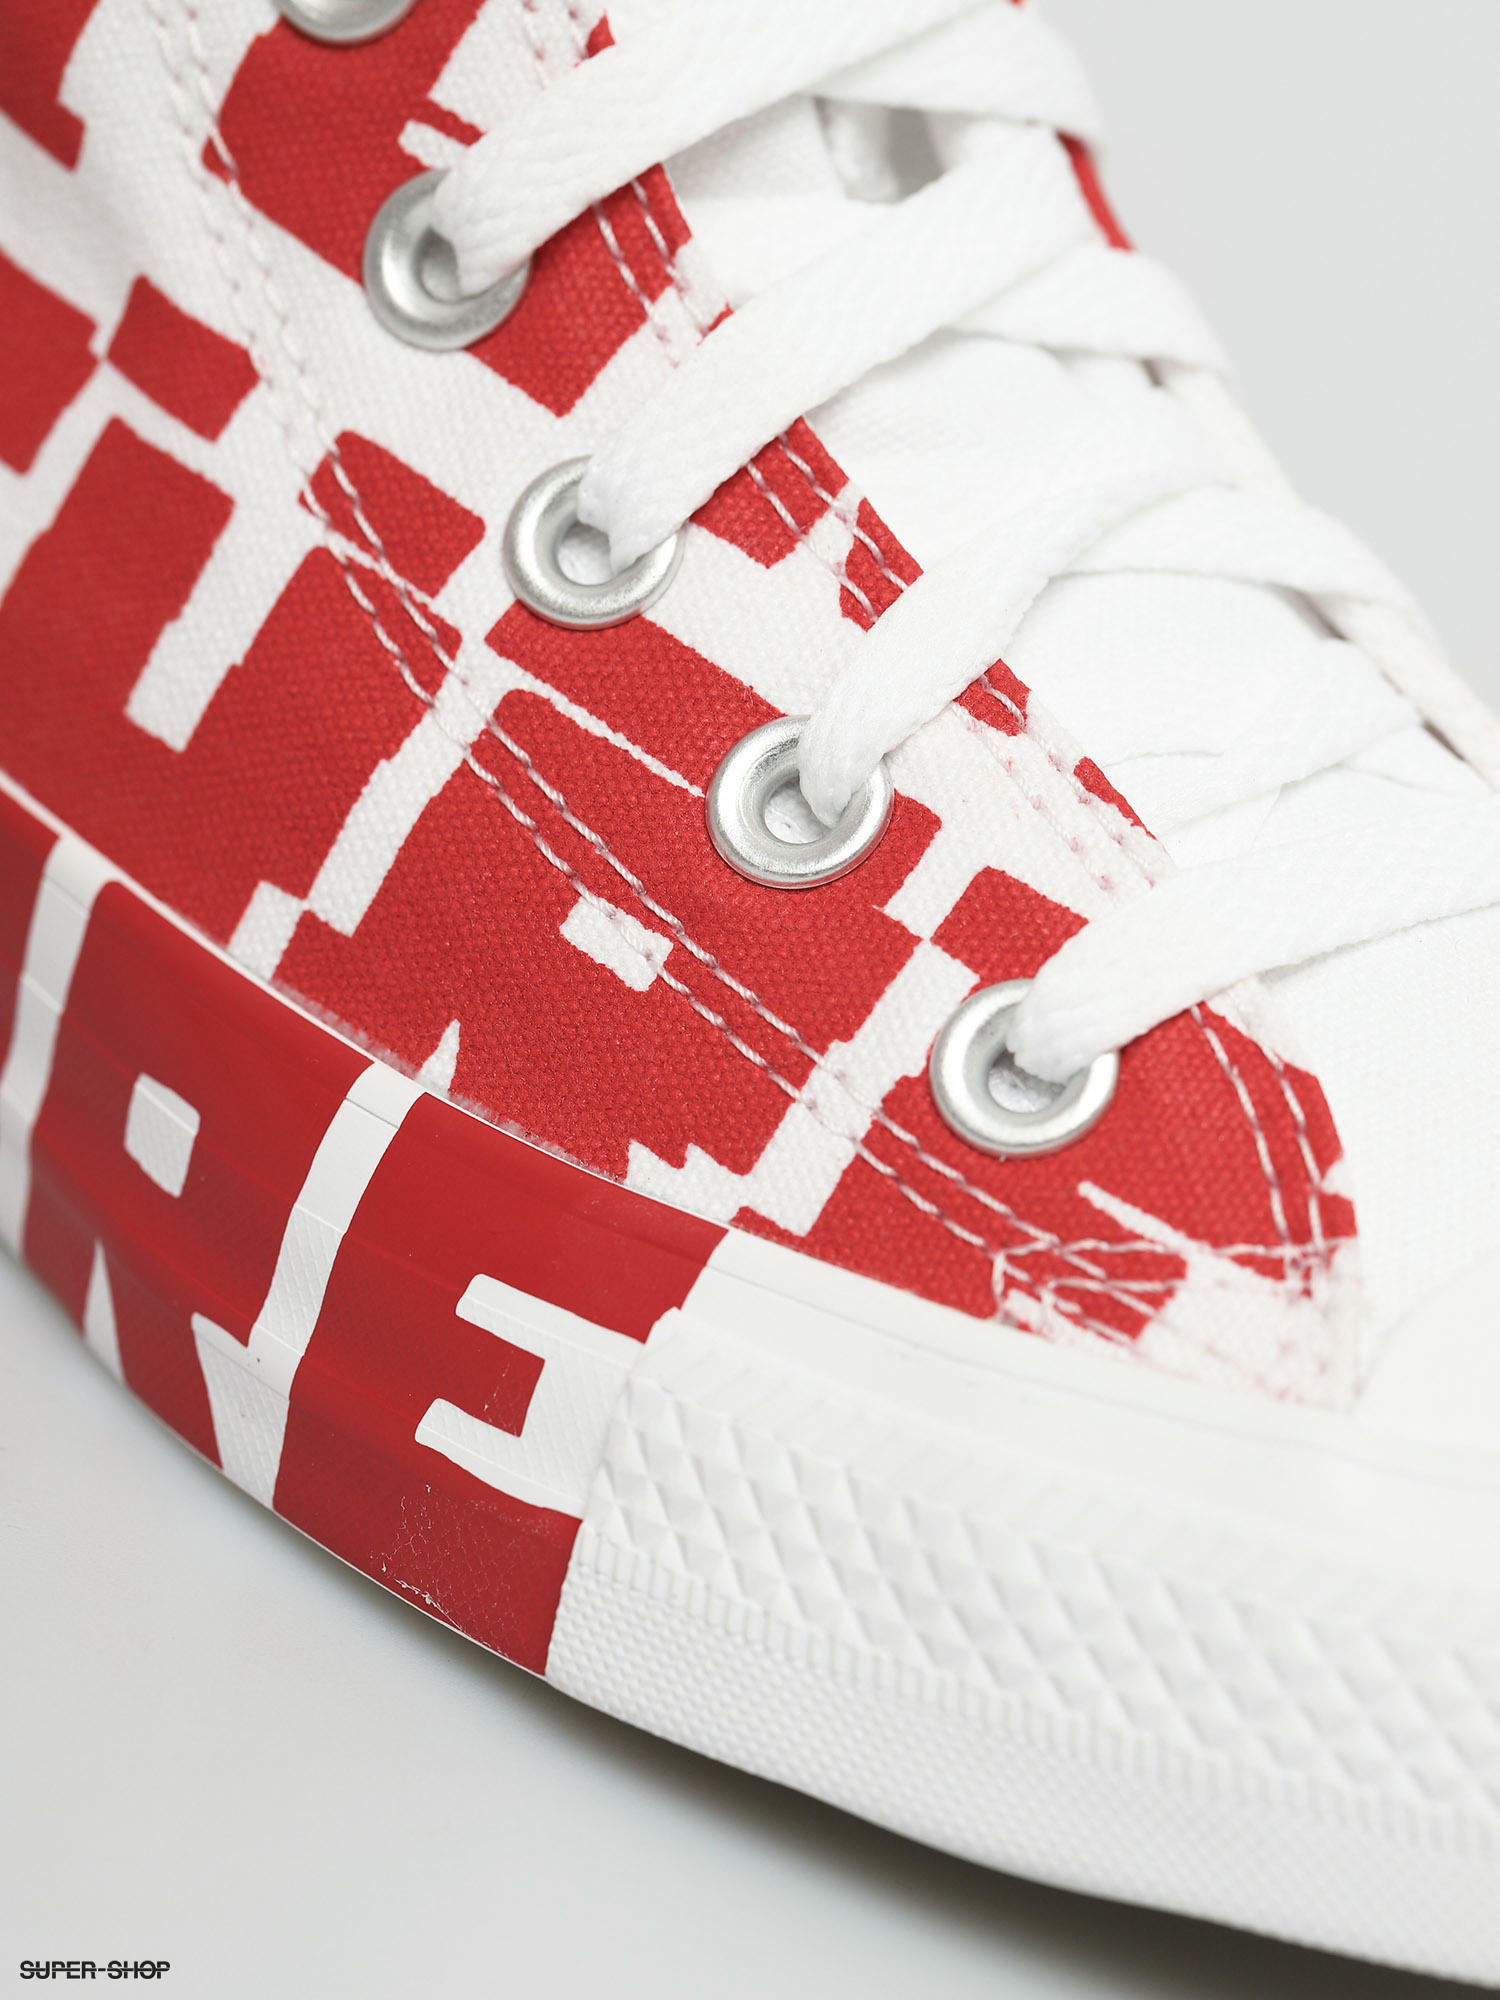 converse red white